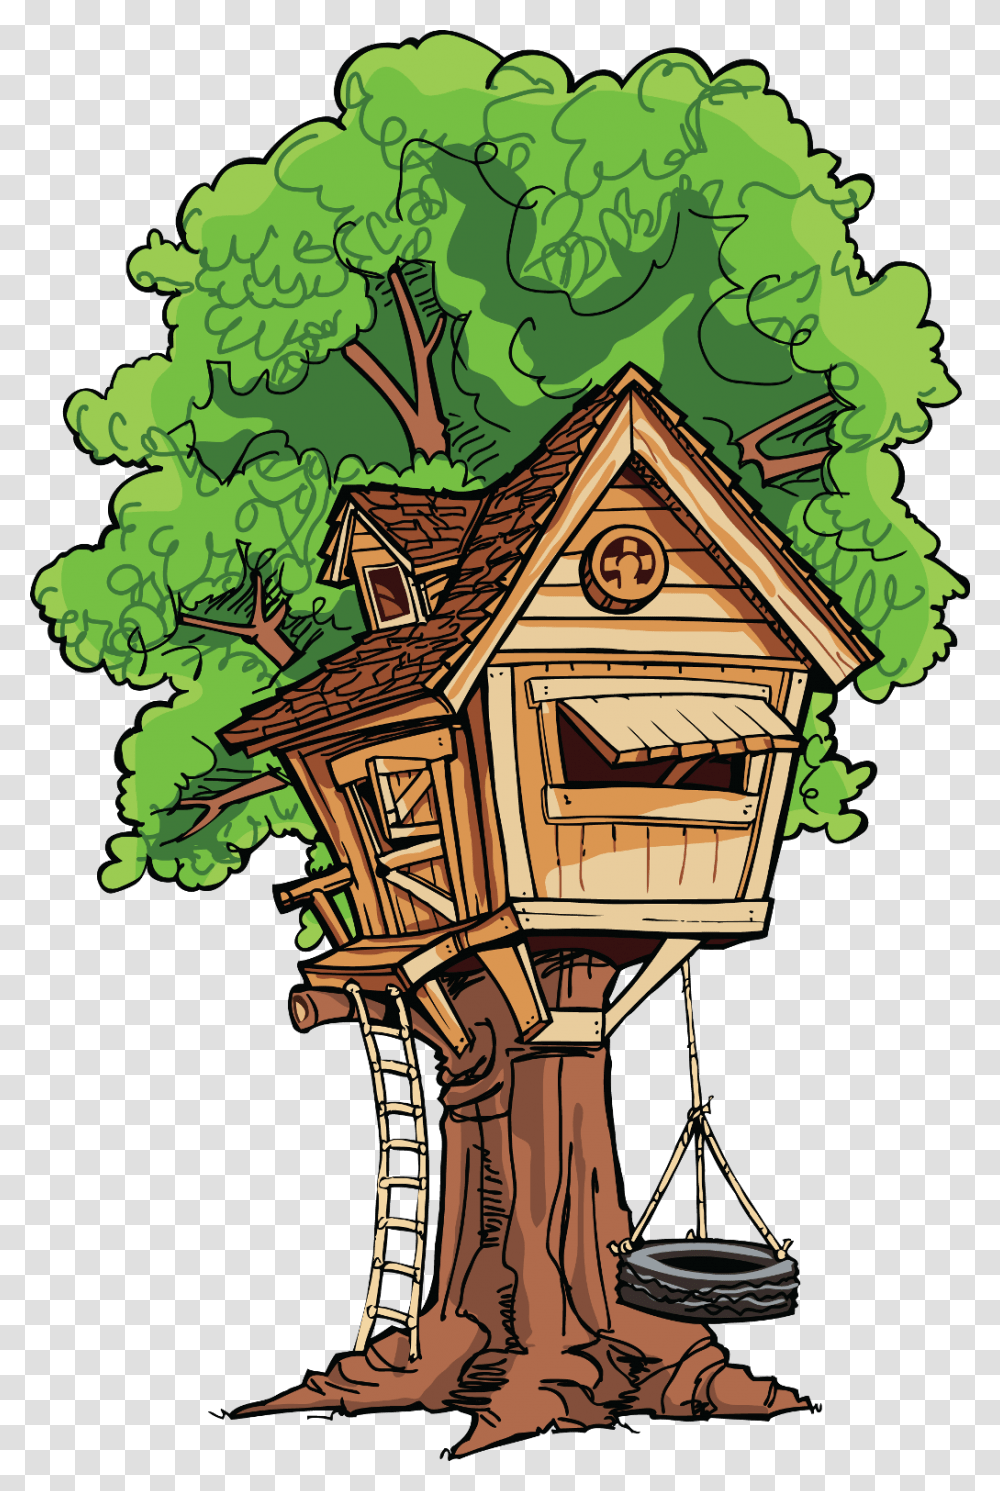 Treehouse Tree Tireswing Yard Playground Terrieasterly Magic Tree House Tree House, Housing, Building, Cabin, Clock Tower Transparent Png